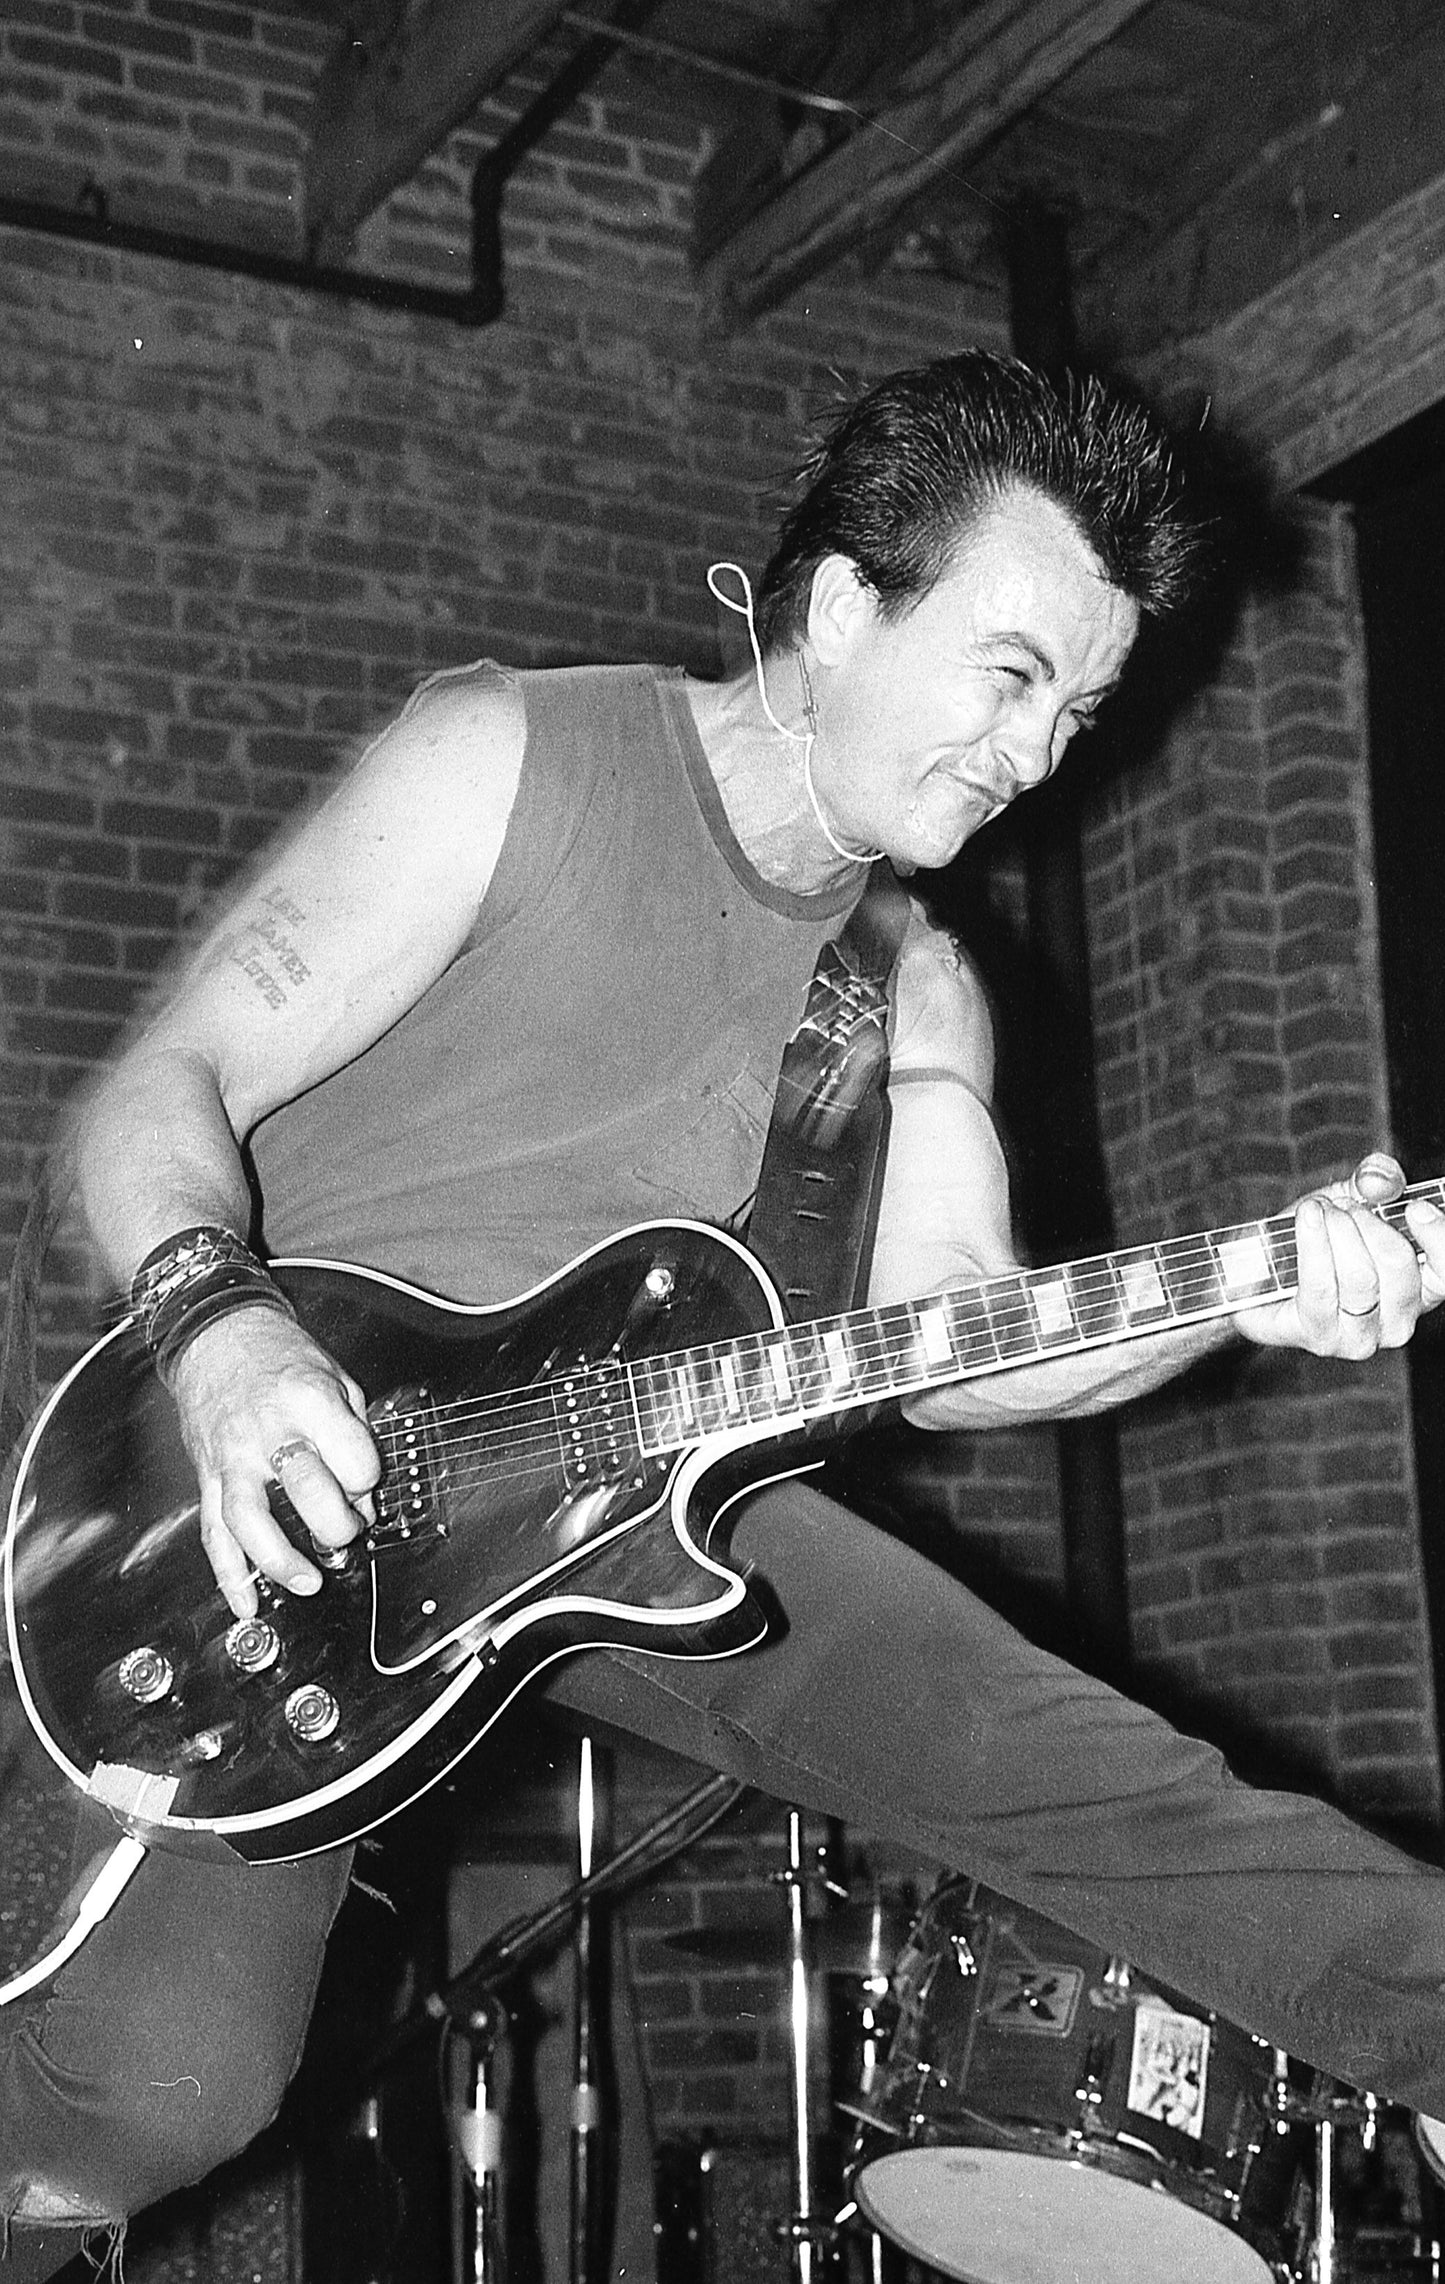 Edward Colver "Lee Ving from FEAR" (1980)